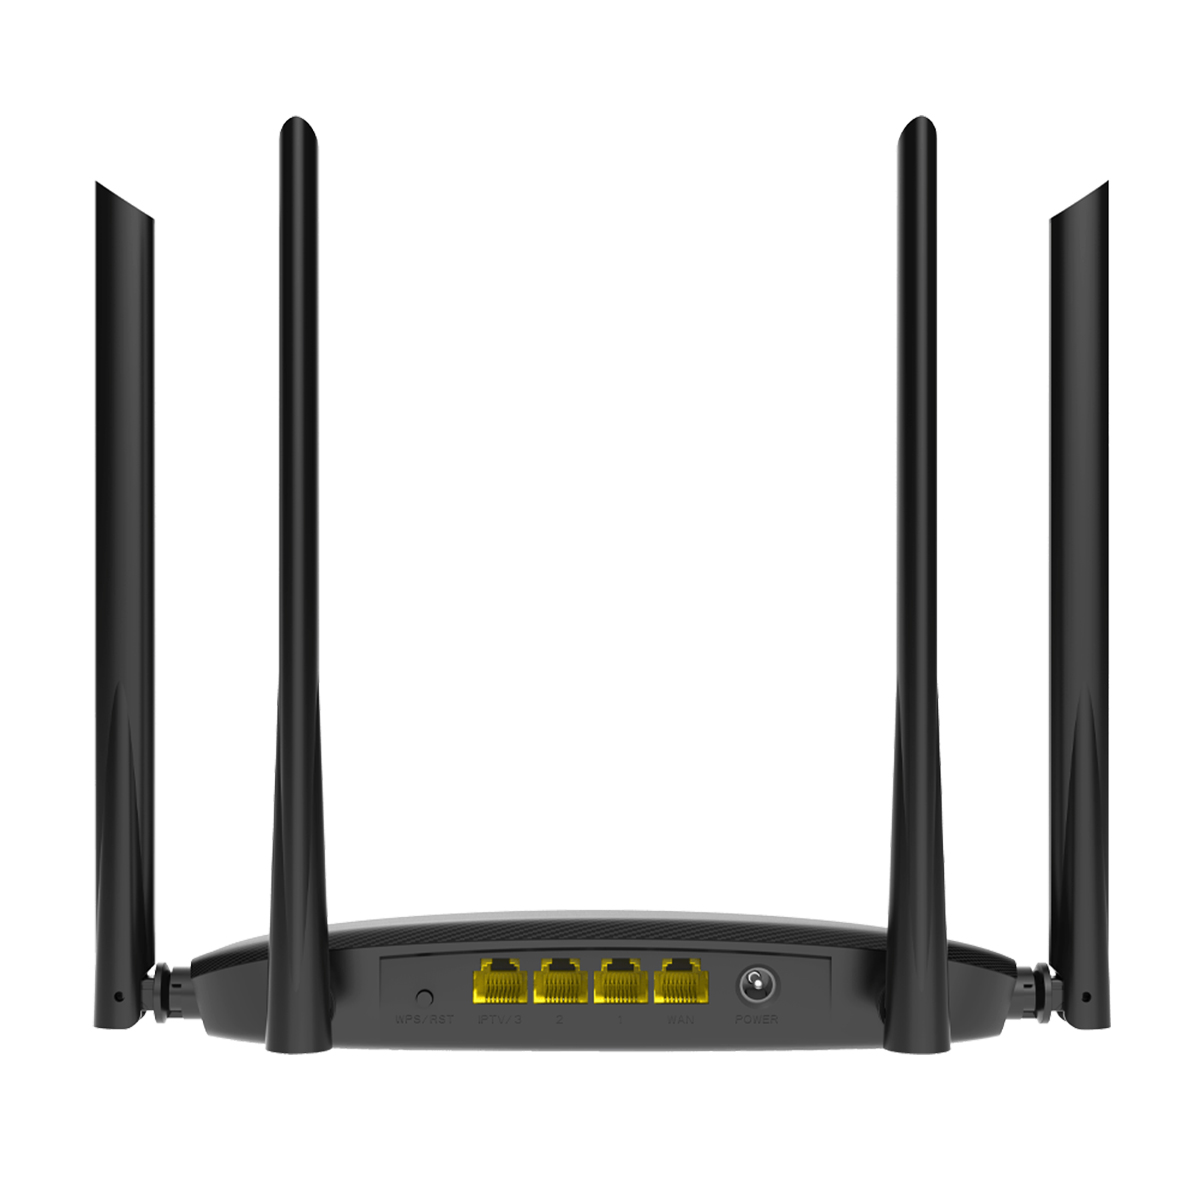 Roteador Wireless 2.4/5ghz 1200mbps Dual Band Gigabit Re015